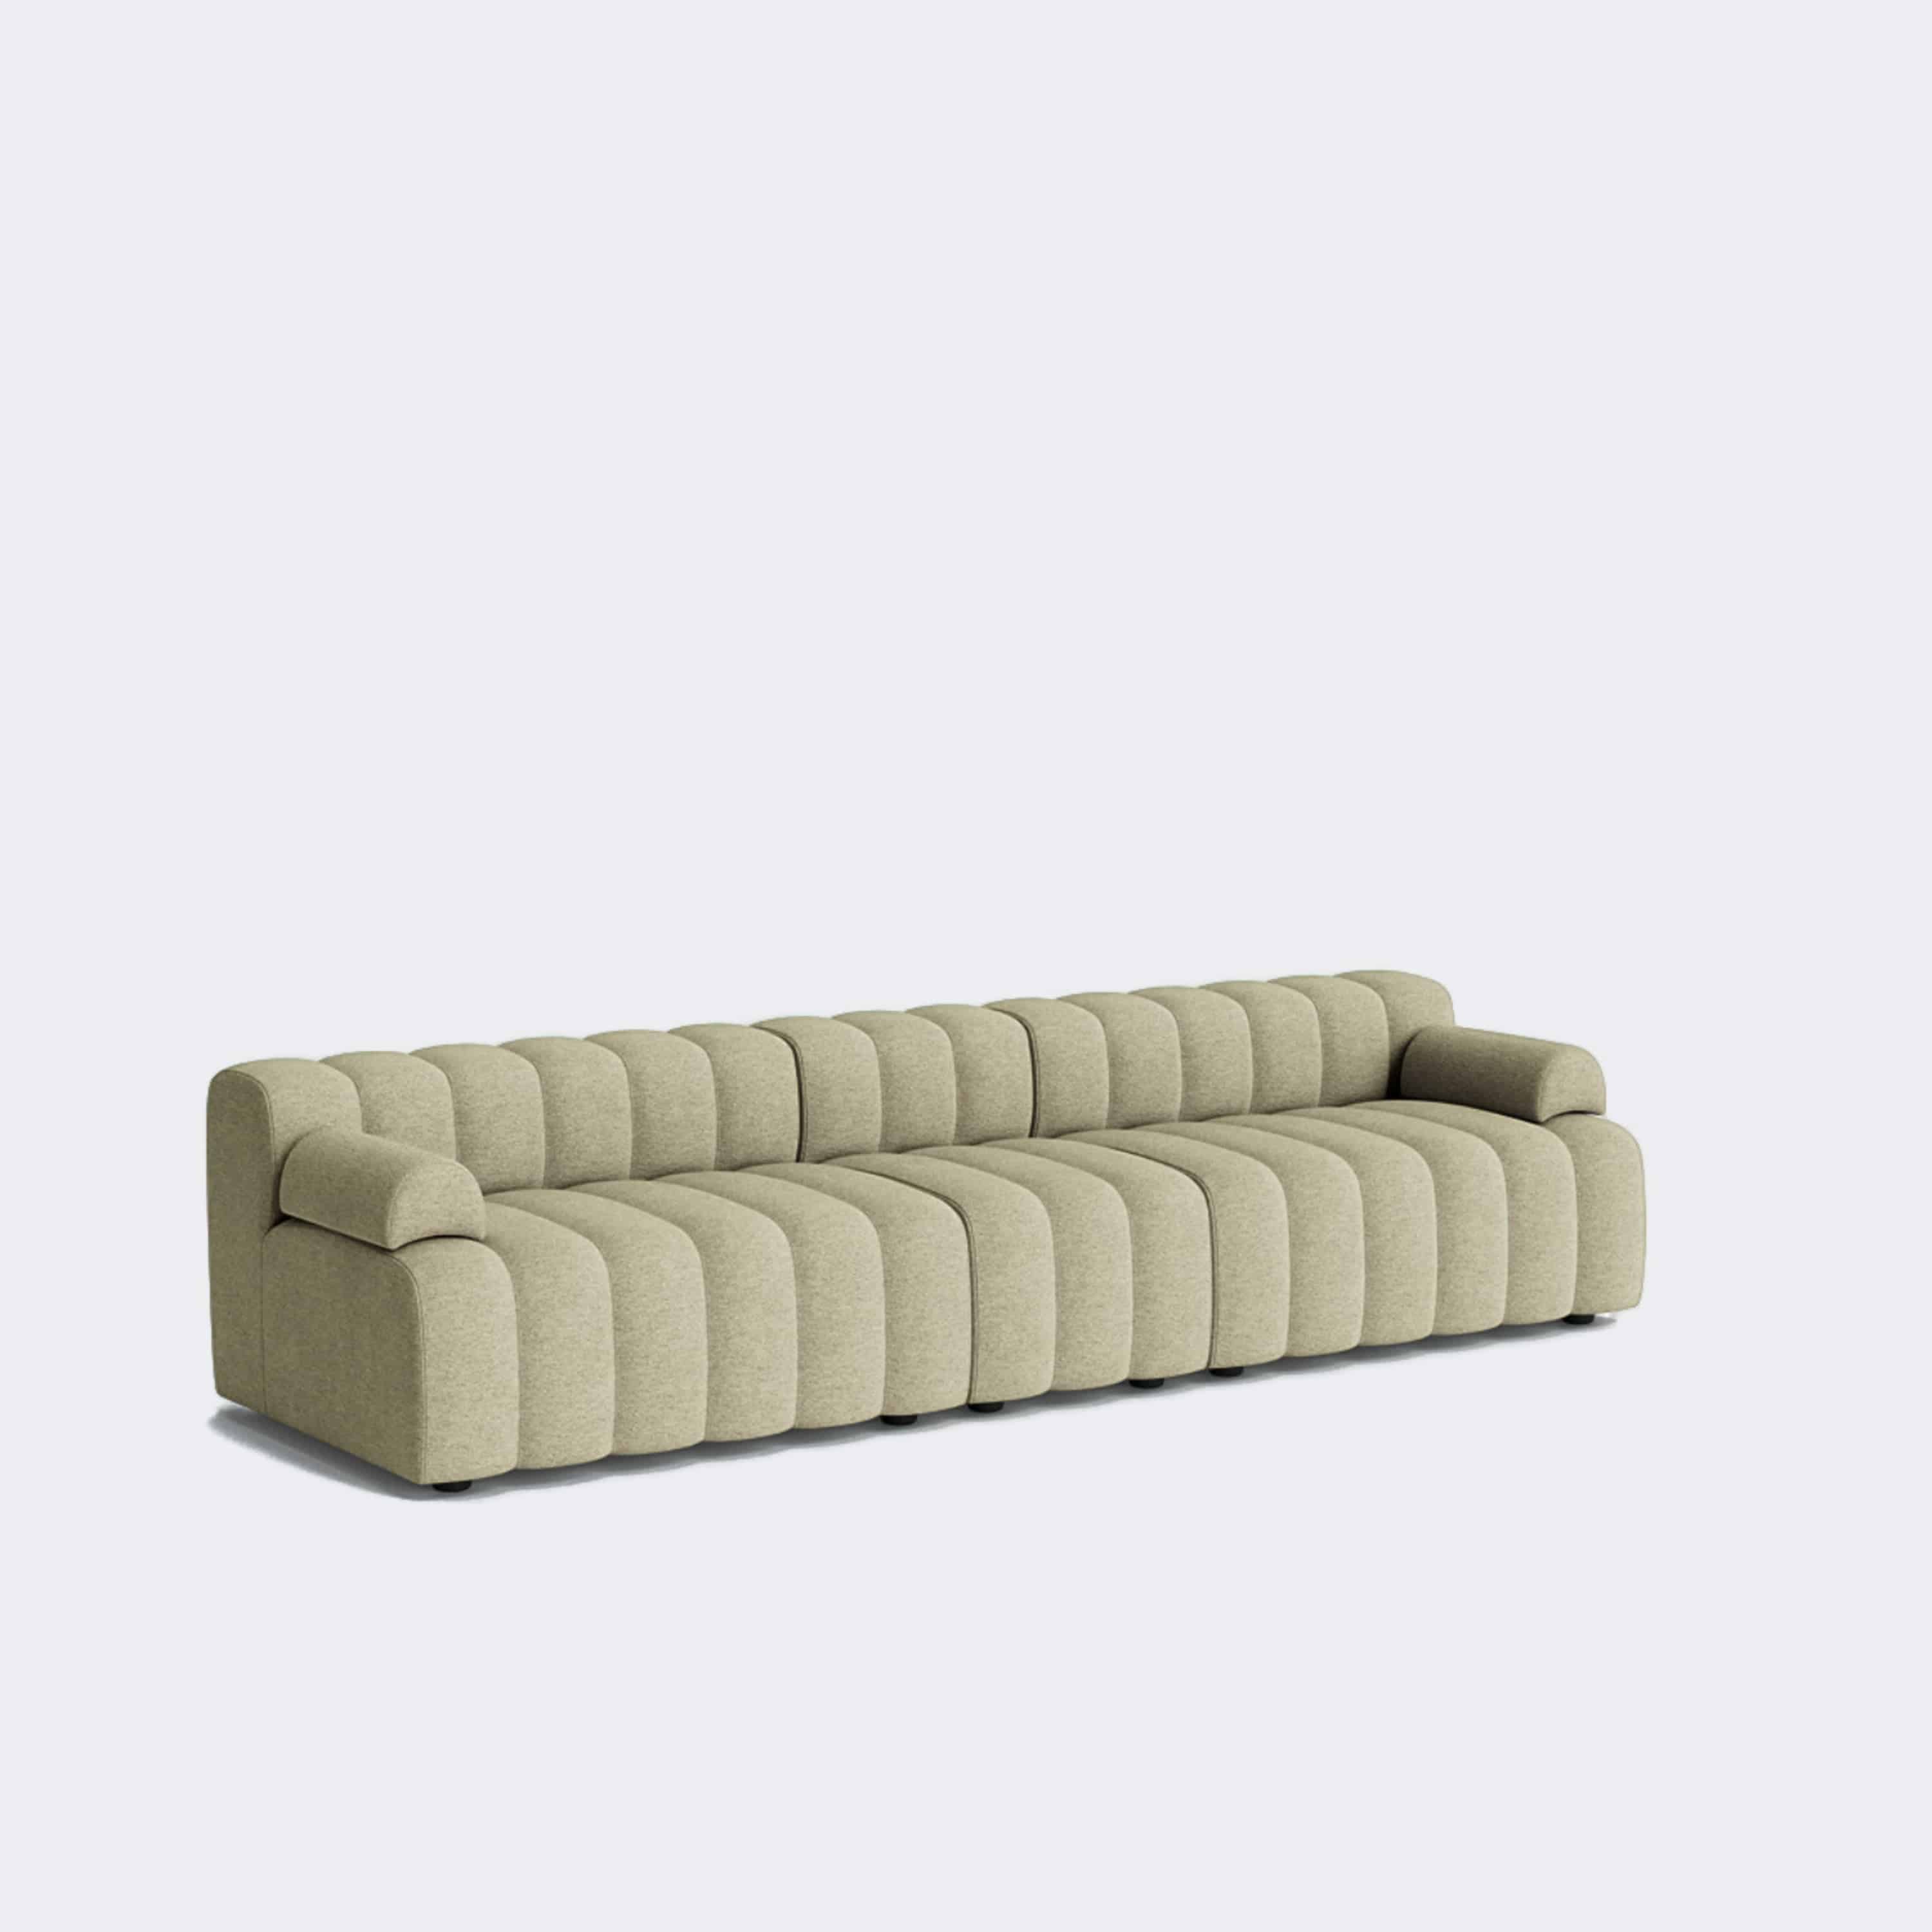 Norr11 Studio 3 Made To Order Barnum Col 7 - KANSO#Upholstery_Barnum Col 7